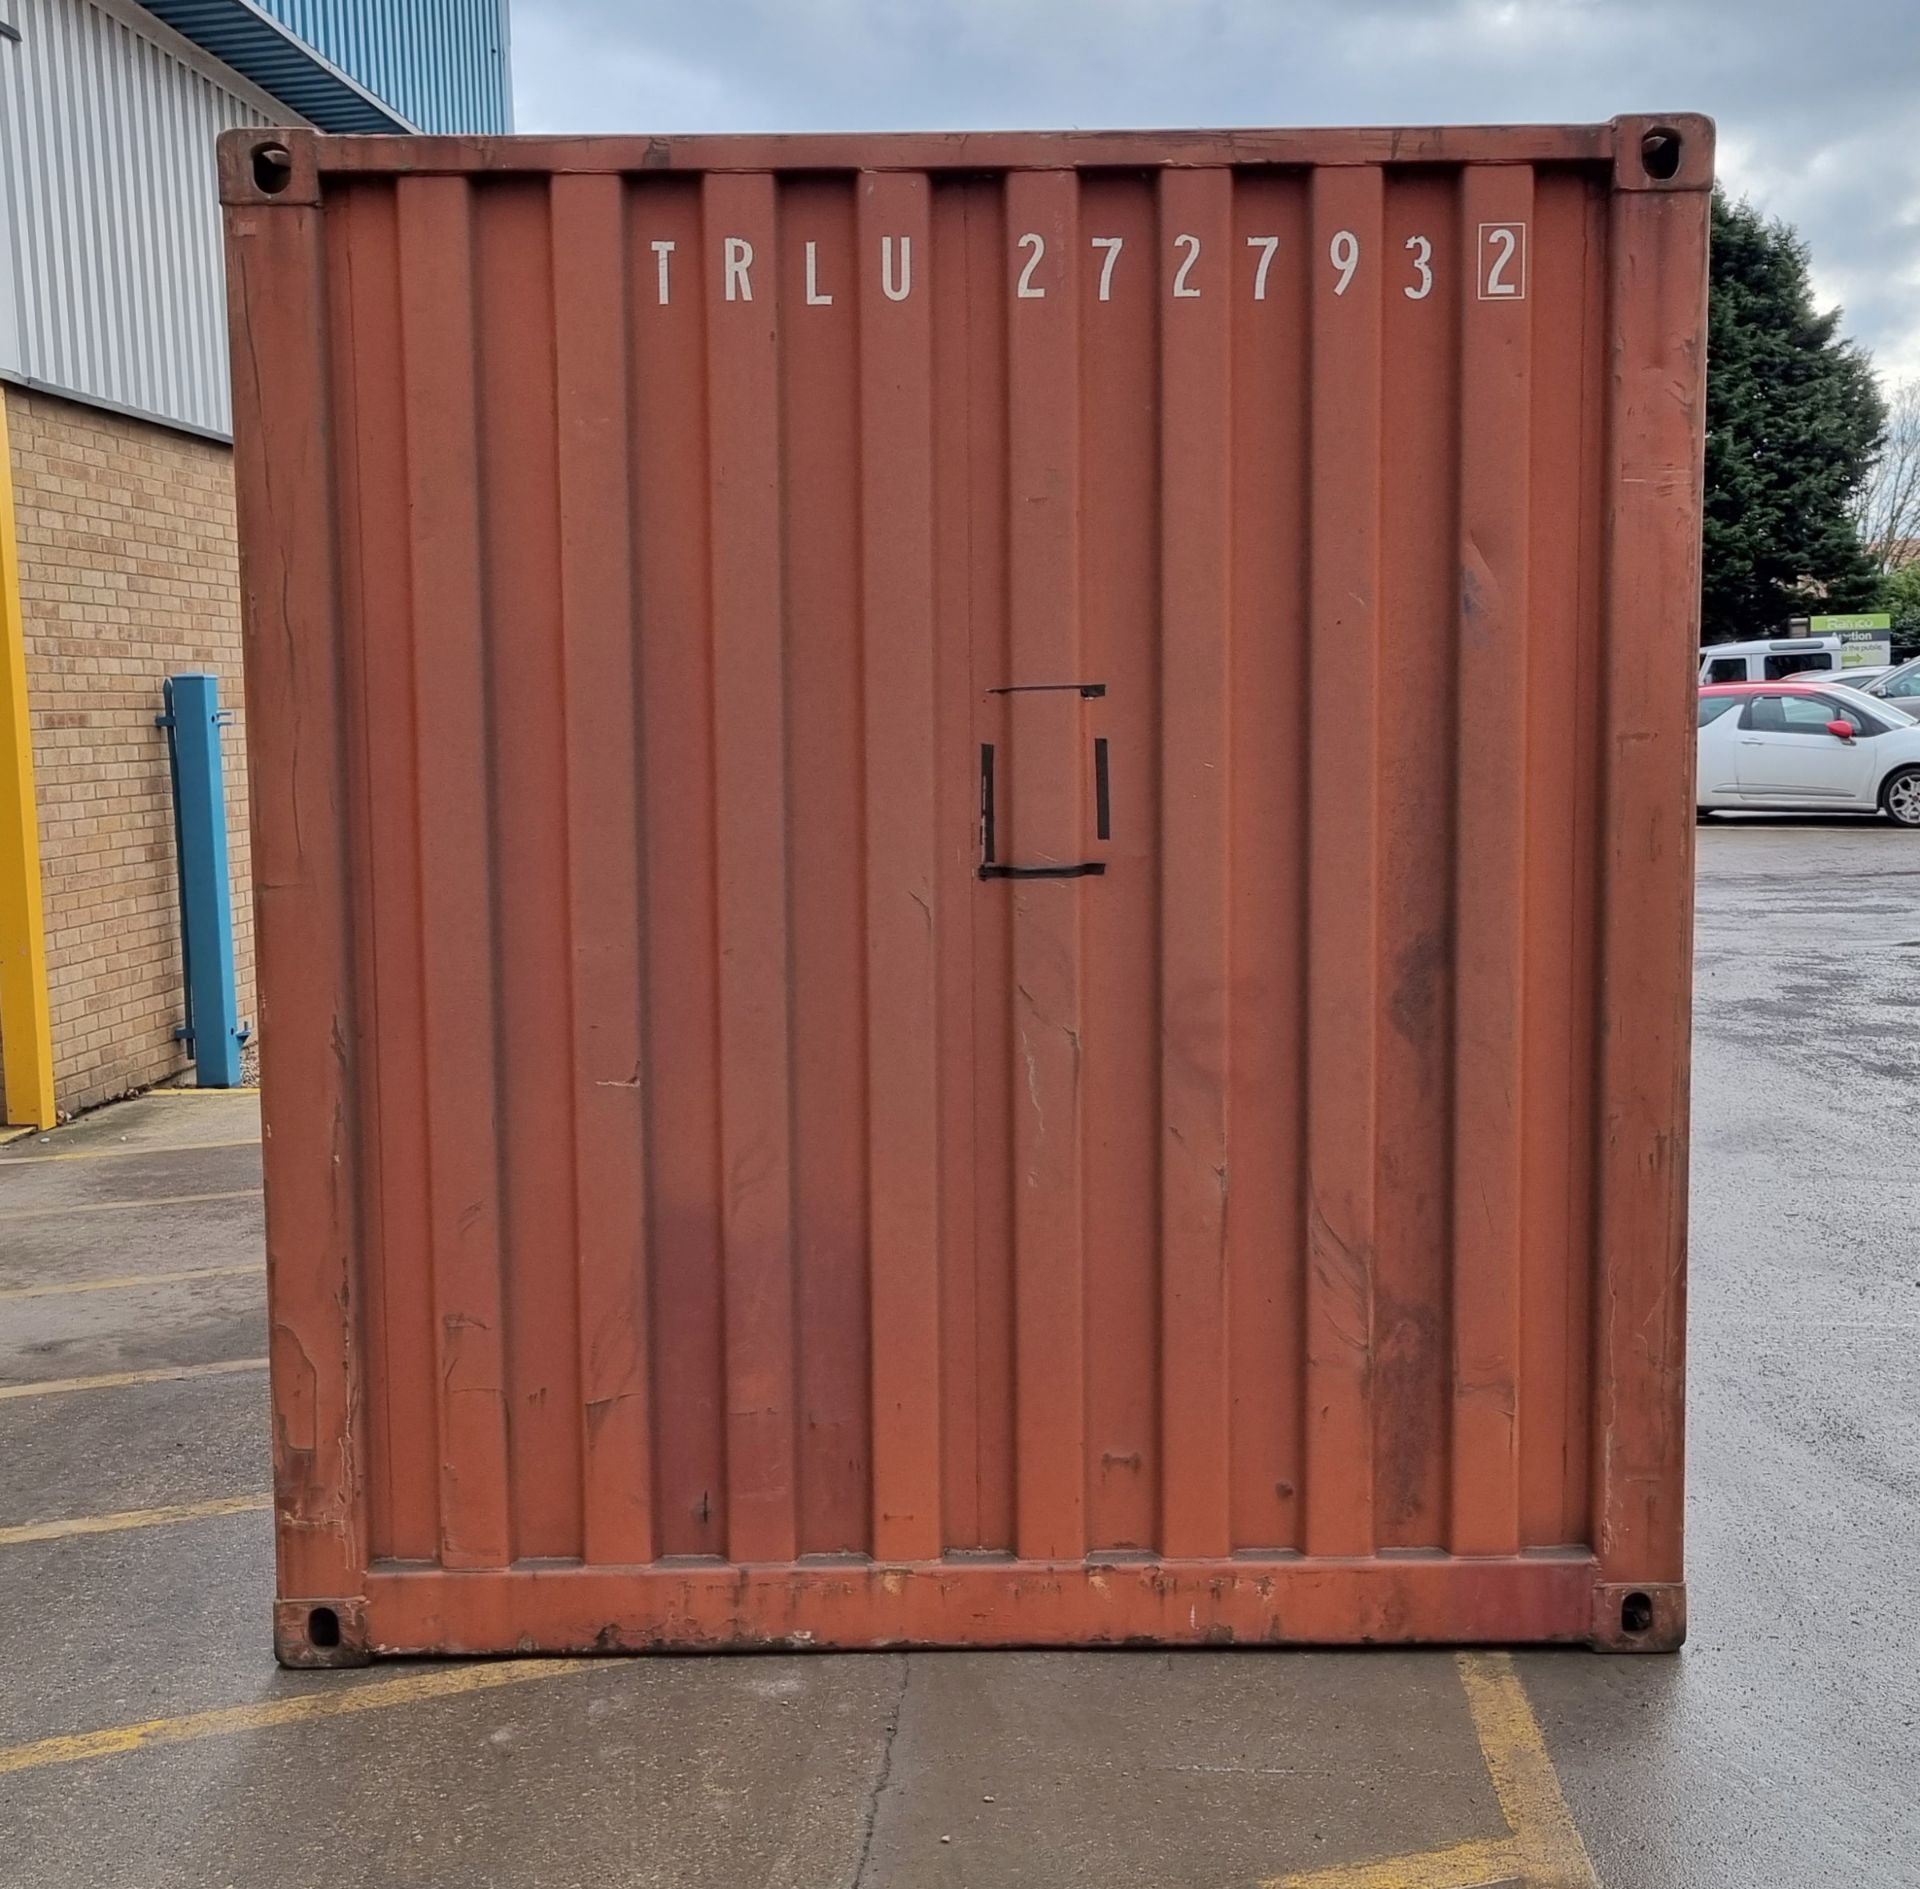 Med Union - Model MU20-1001-TA shipping container - L600 x W240 x H258cm - Image 3 of 12